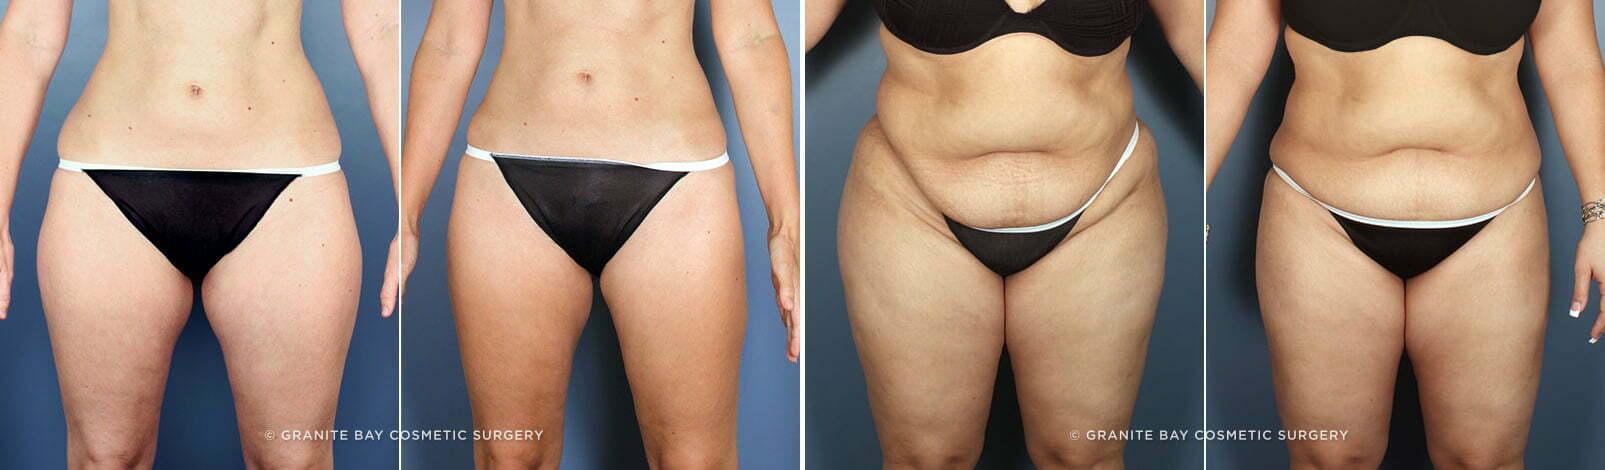 Tips for Comparing Before & After Photos - Granite Bay Cosmetic Surgery